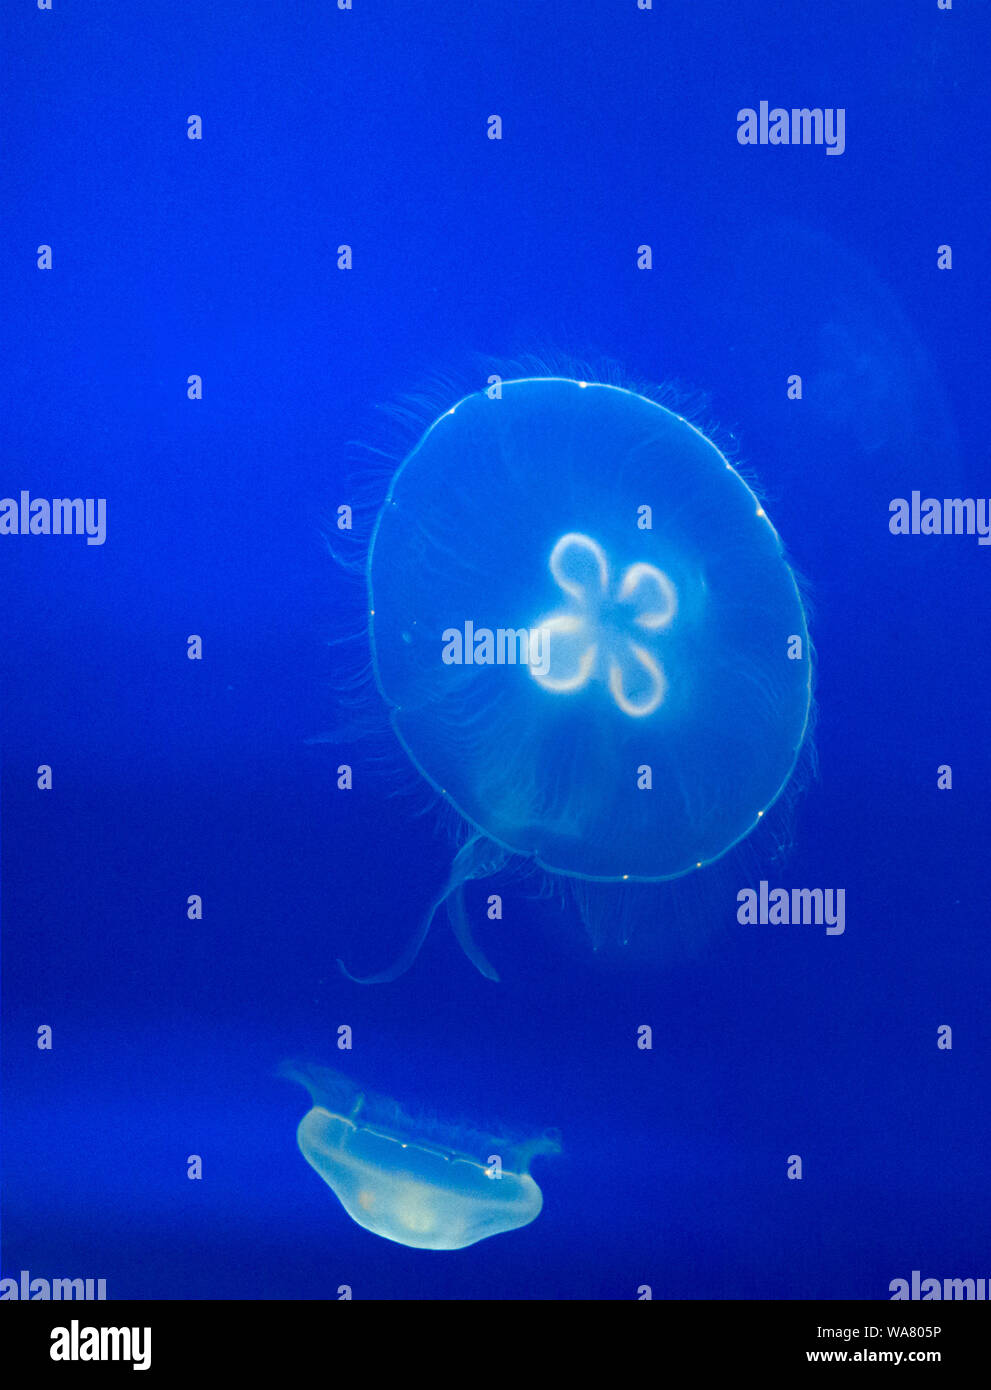 Beautiful transparent jelly fish floats in blue waters Stock Photo